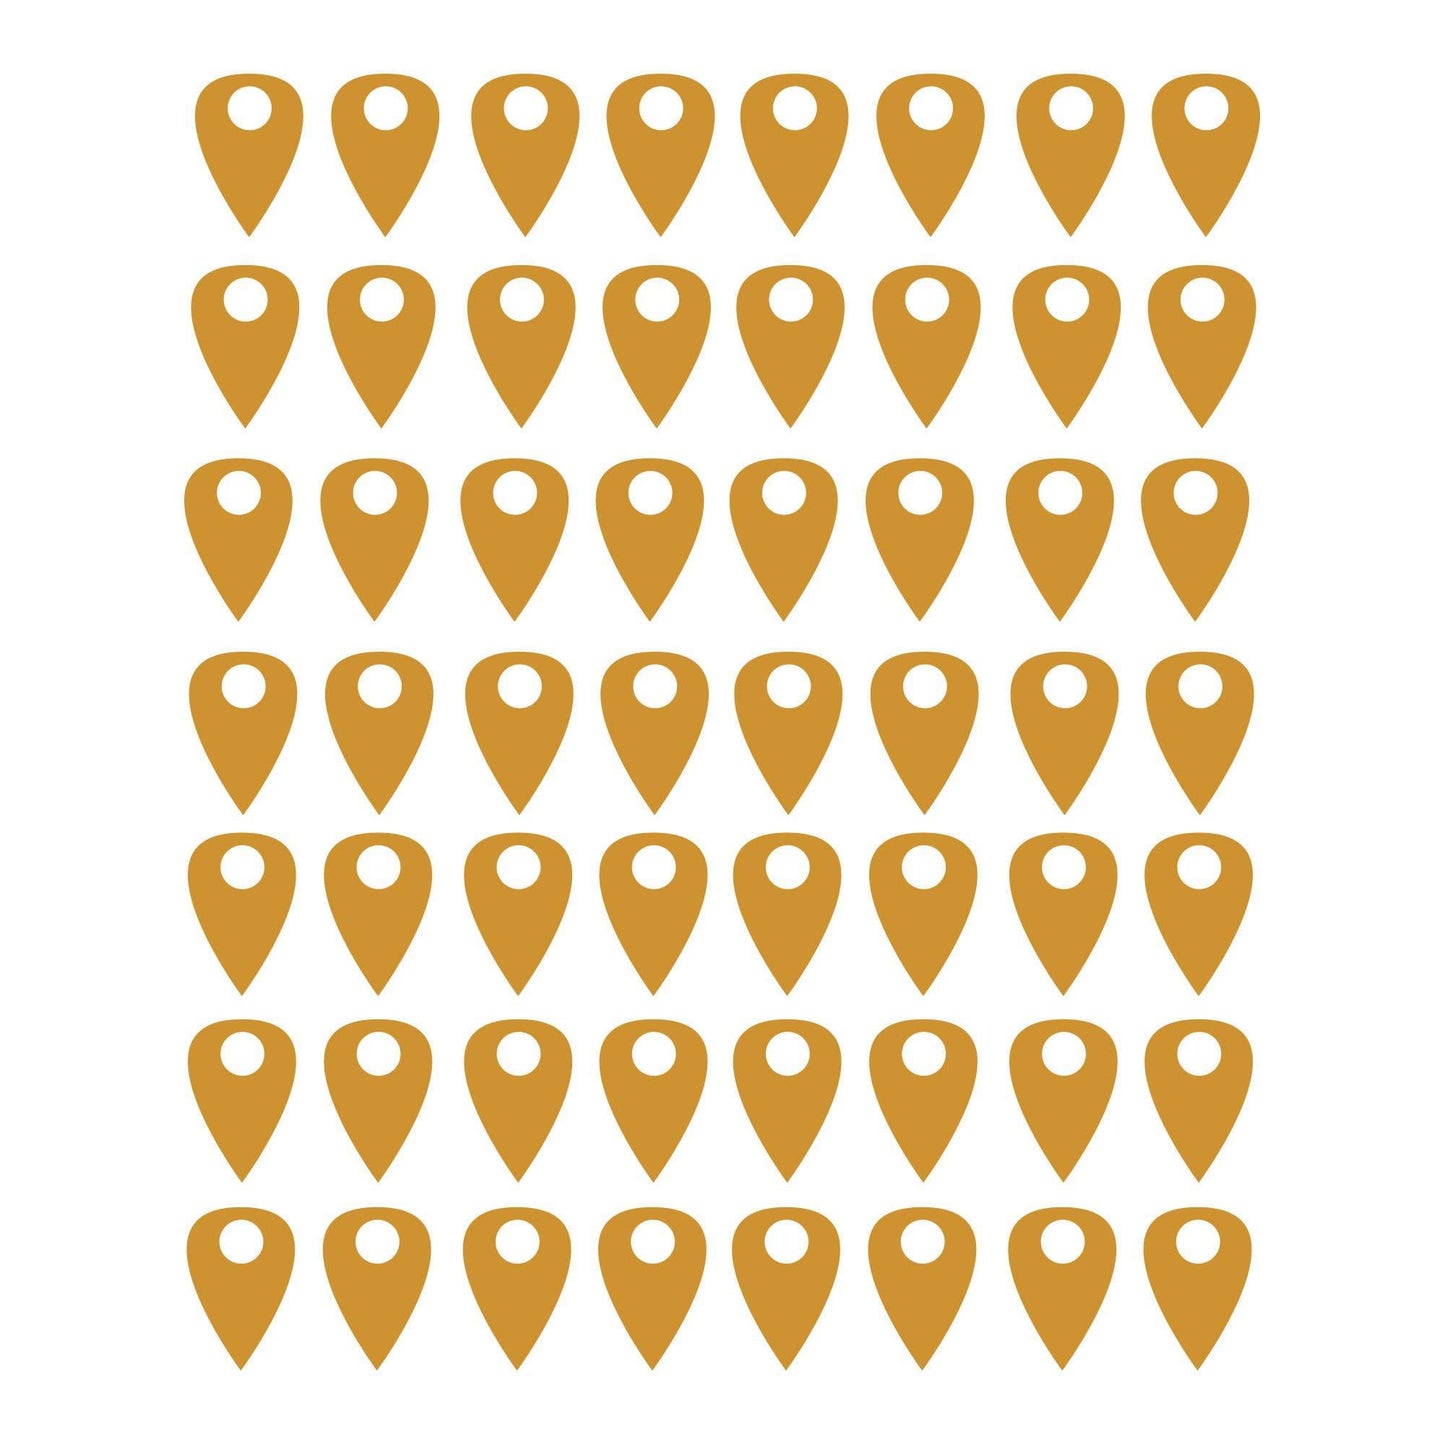 Gold pins on a white background.